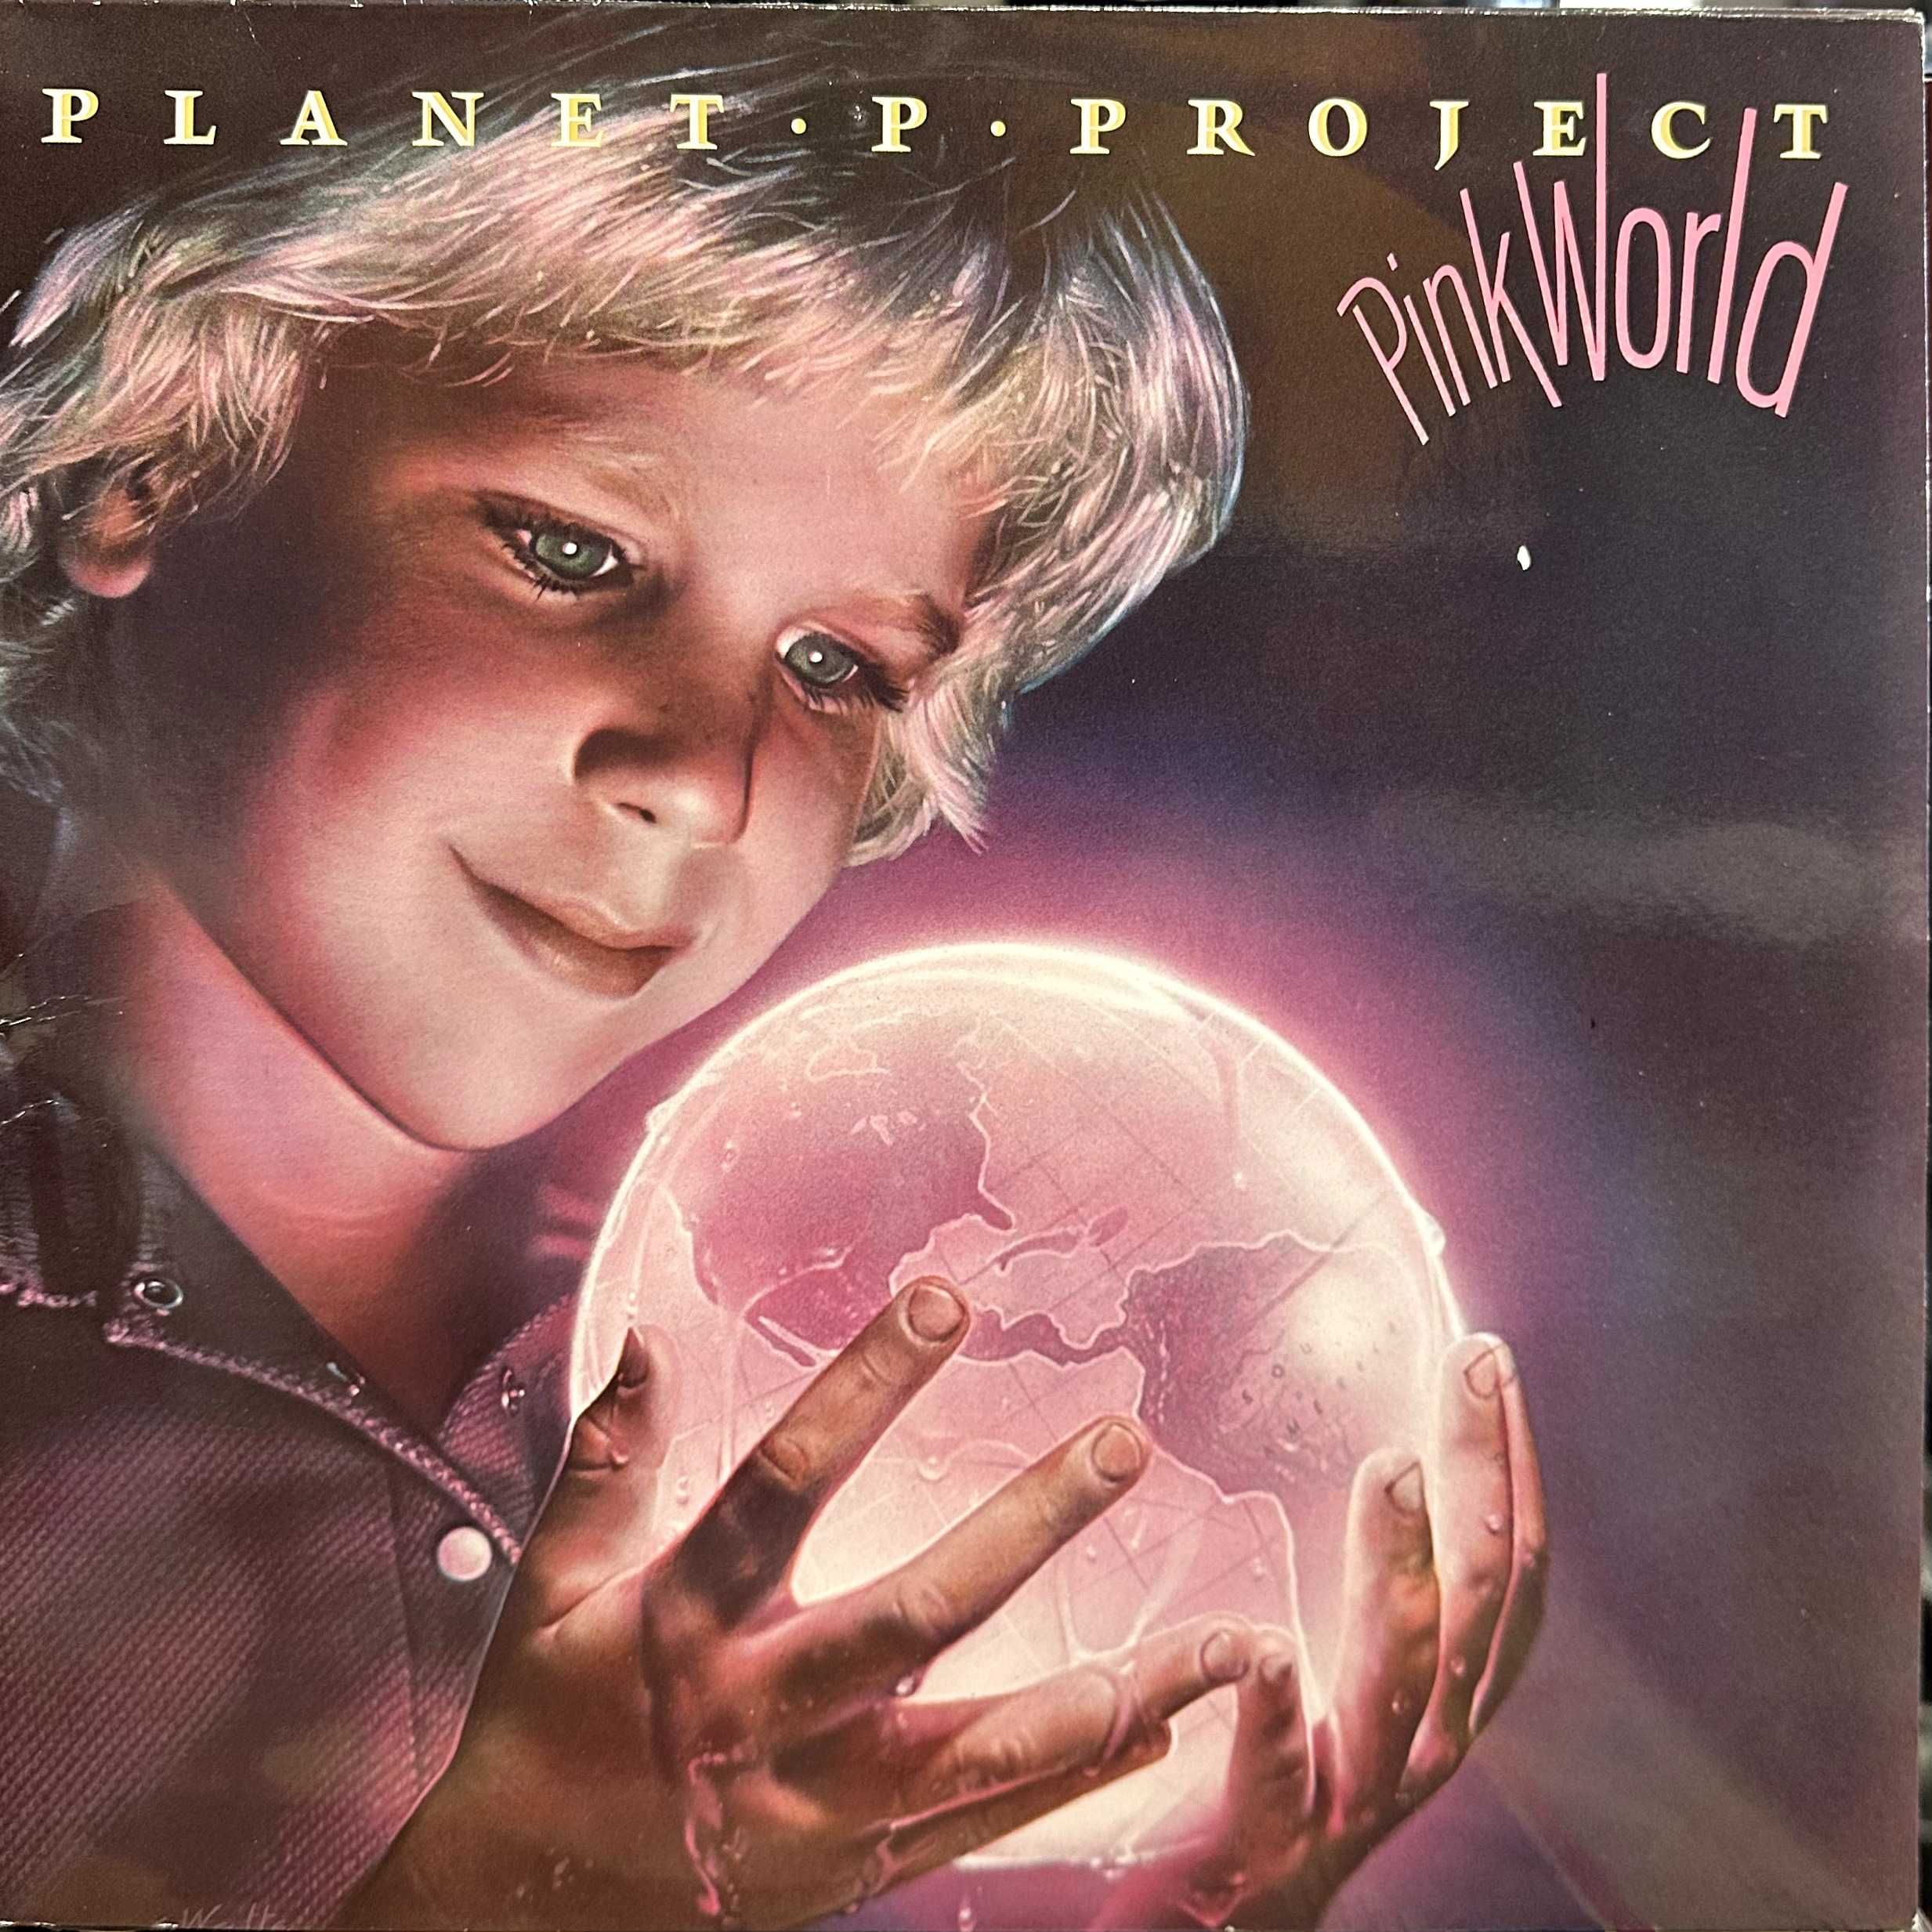 Planet Project - Pink World (Vinyl, 1984, Europe)